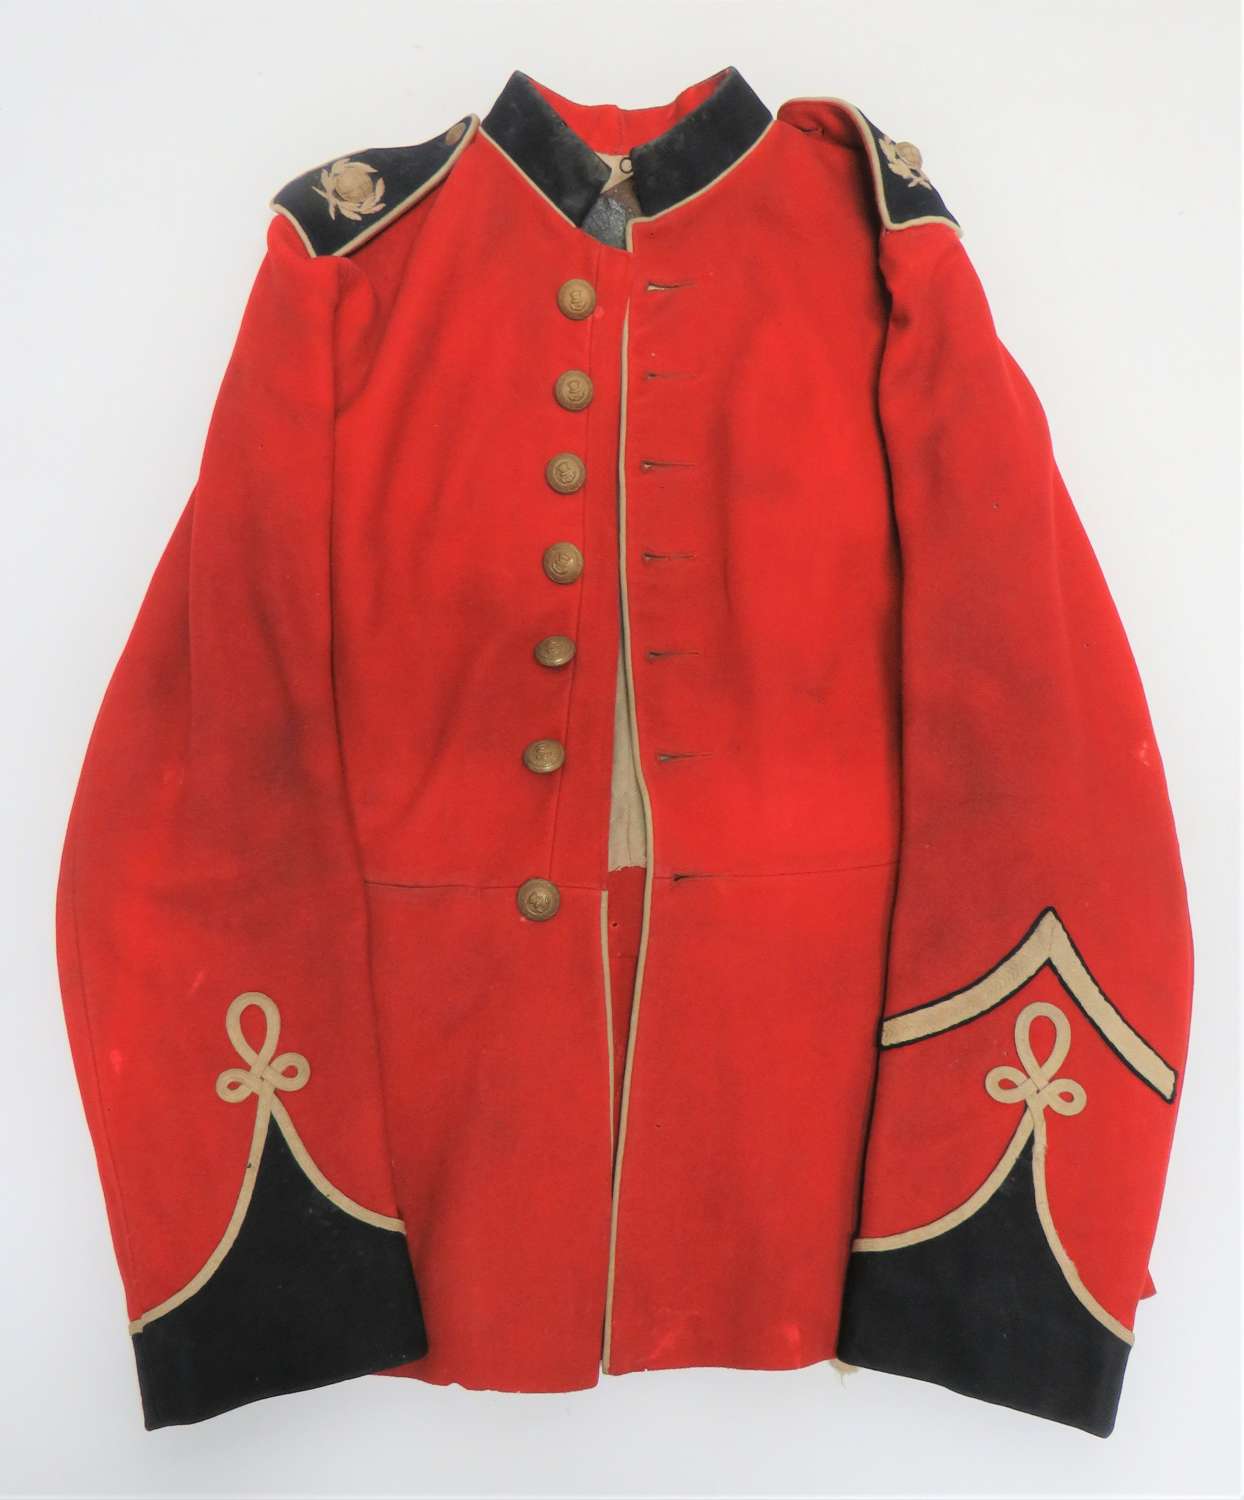 Attributed Victorian Royal Marine Light Infantry Scarlet Dress Tunic